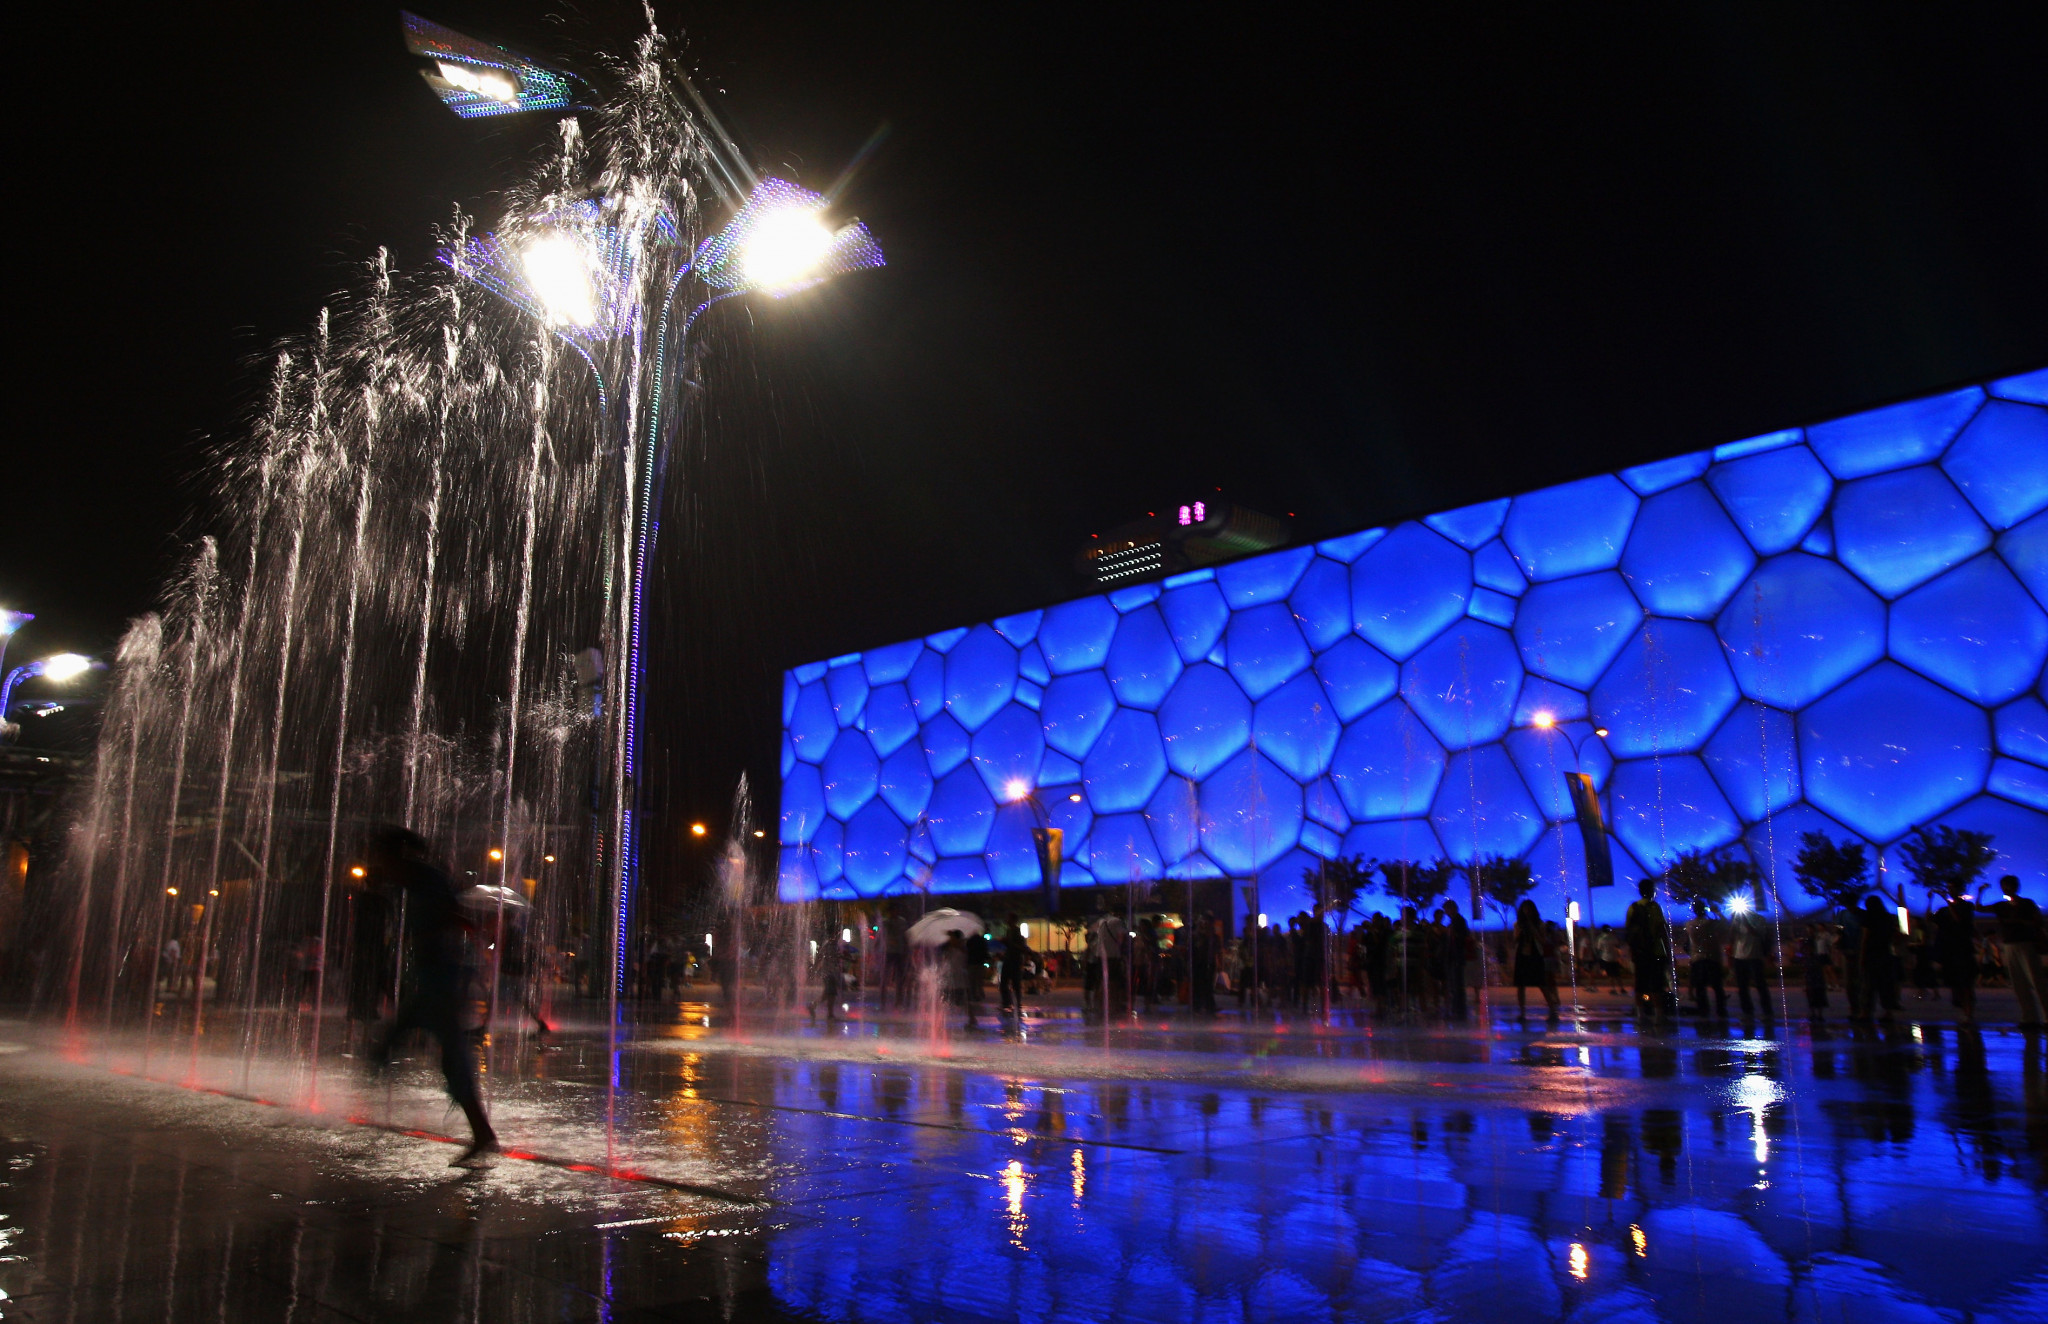 Work begun at the end of last year to transform China's National Aquatics Centre, otherwise known as the "Water Cube", into the "Ice Cube" for Beijing 2022 ©Getty Images